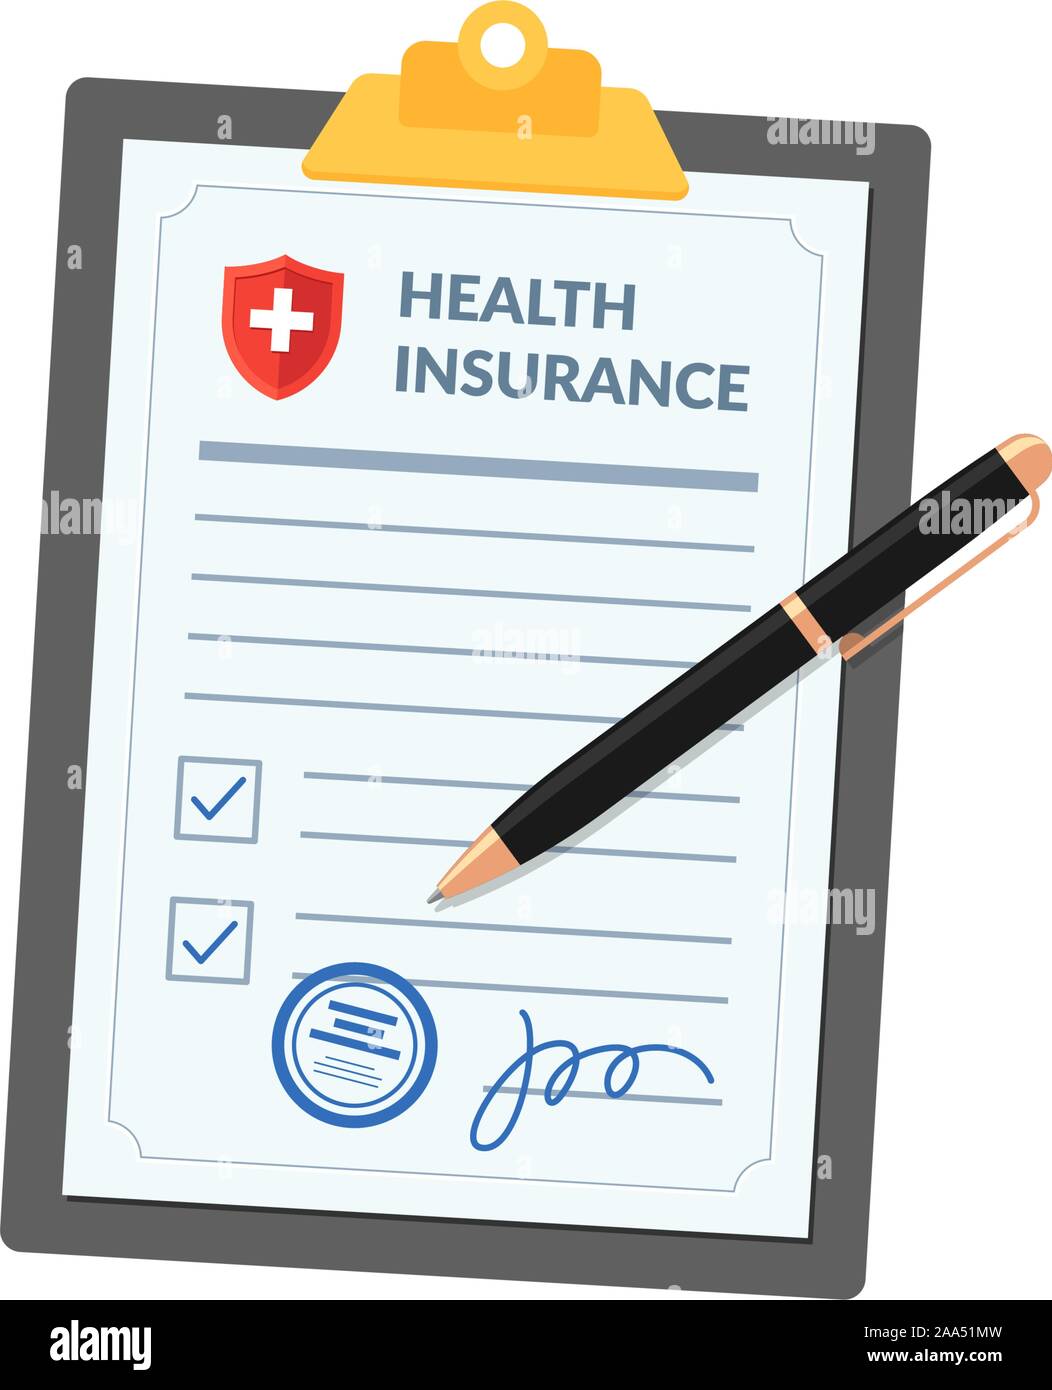 Medical health insurance policy on clipboard with pen isolated on white background. Hospital agreement contract document check list with signature on board. Injury risk law legal vector illustration Stock Vector